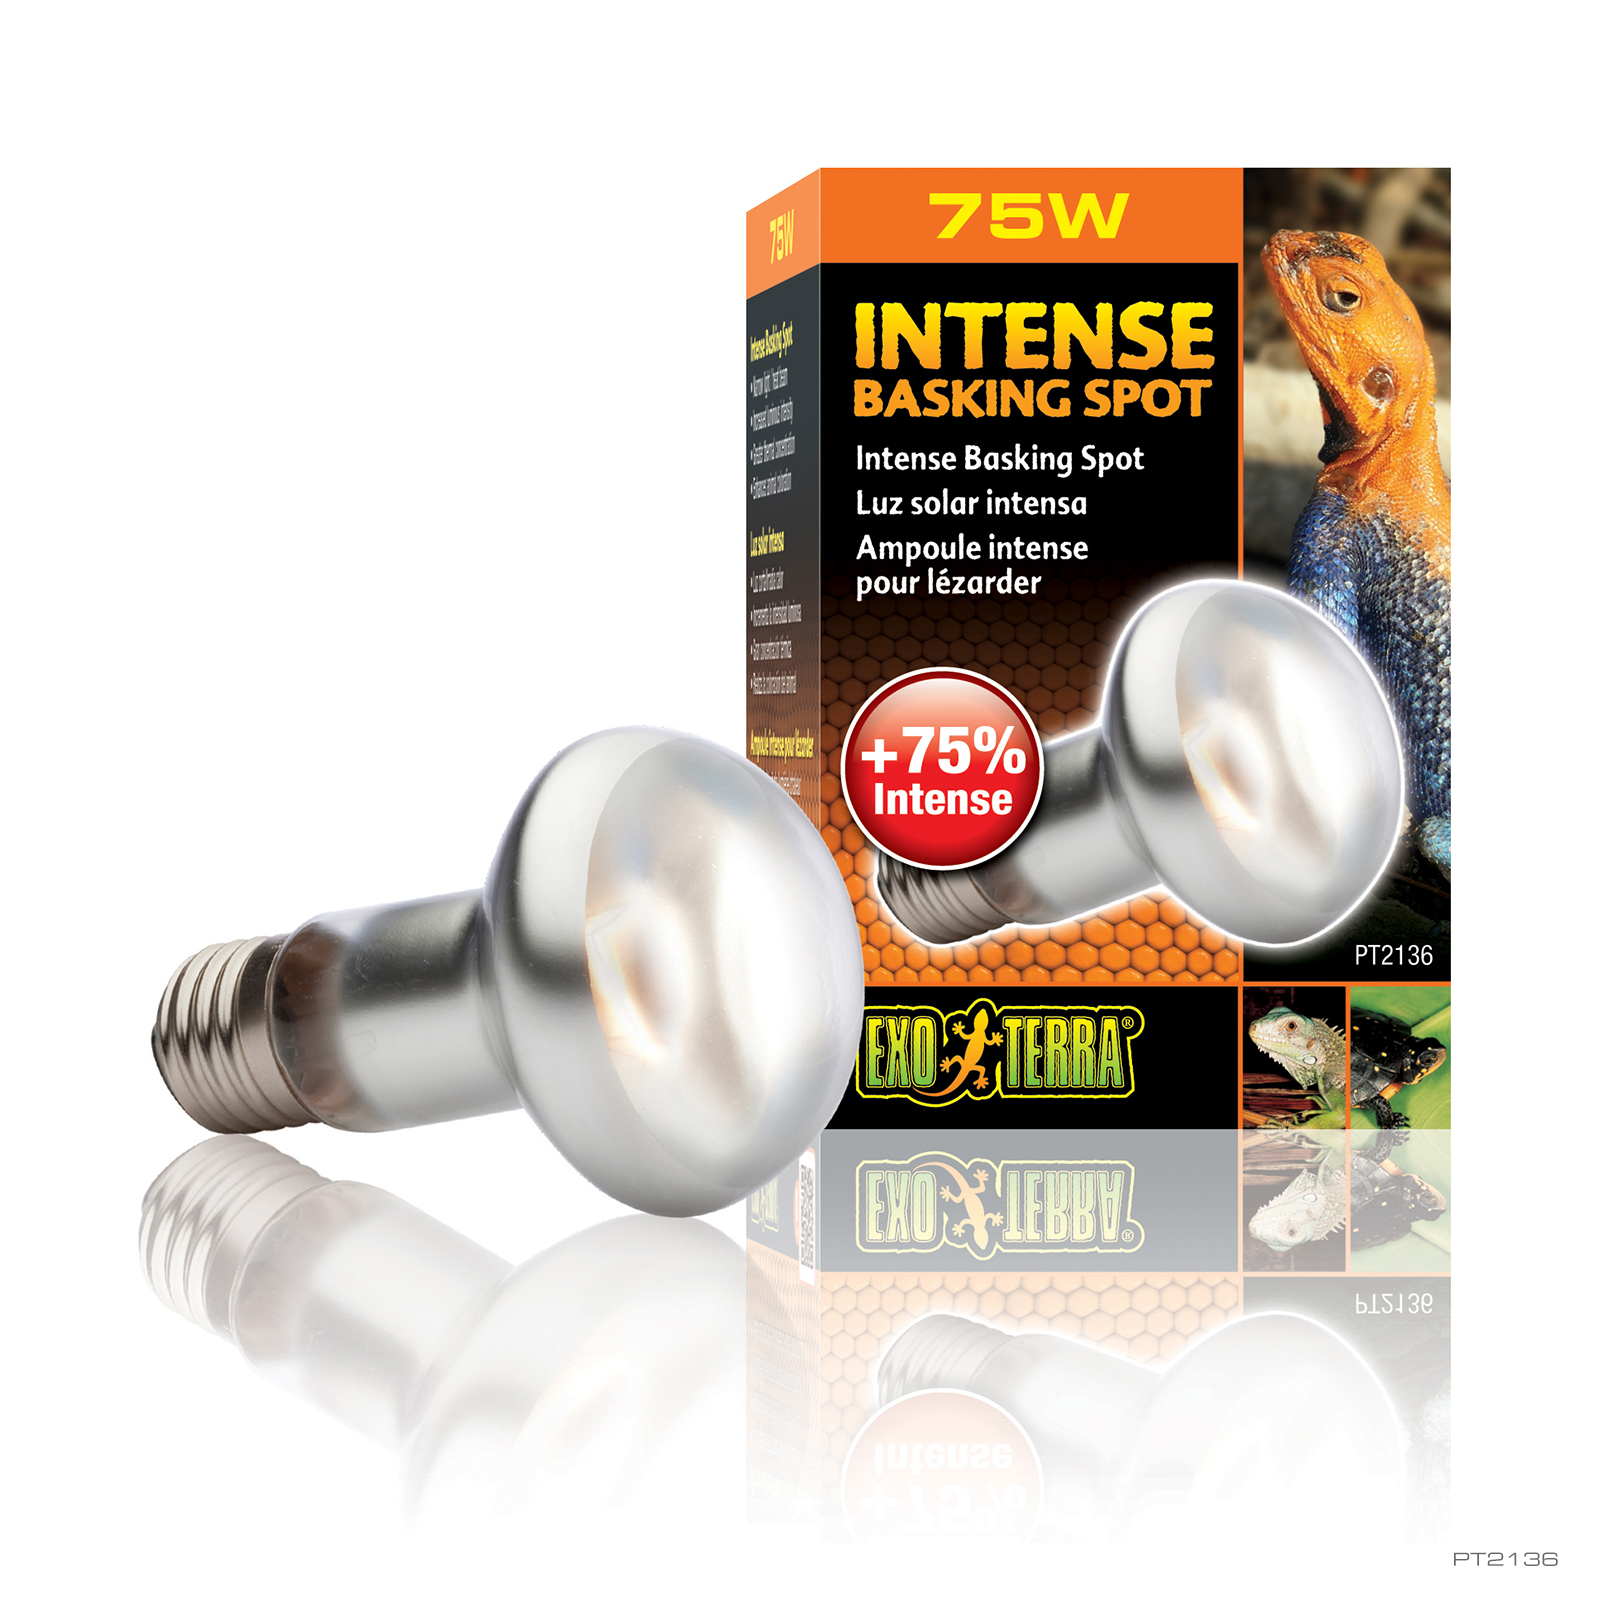 Exo Terra Infrared Thermometer